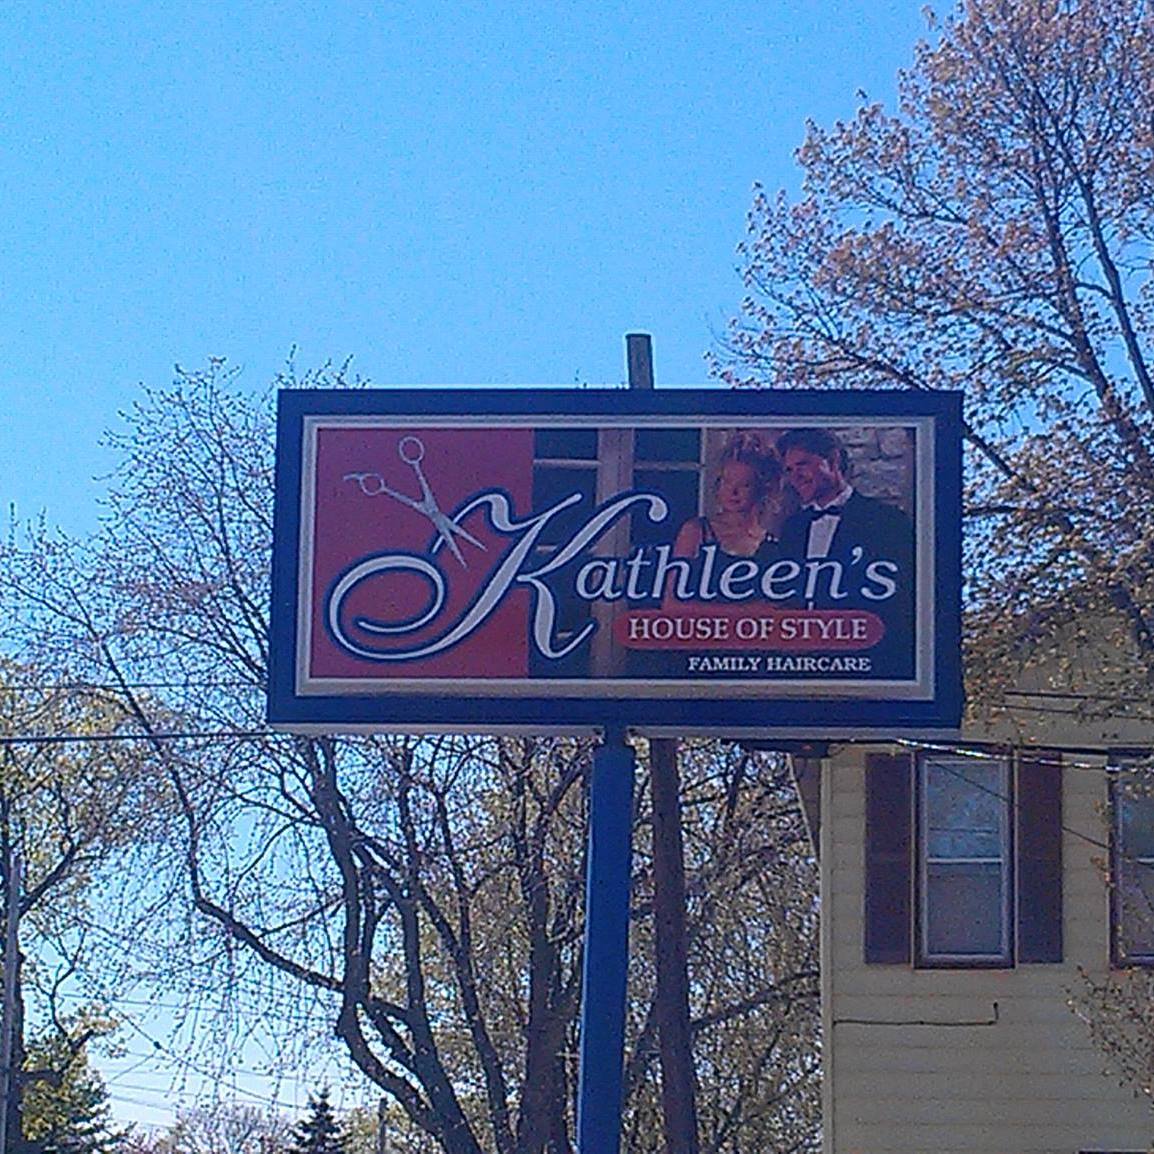 Kathleen's House of Style 466 1st St, Manistee Michigan 49660